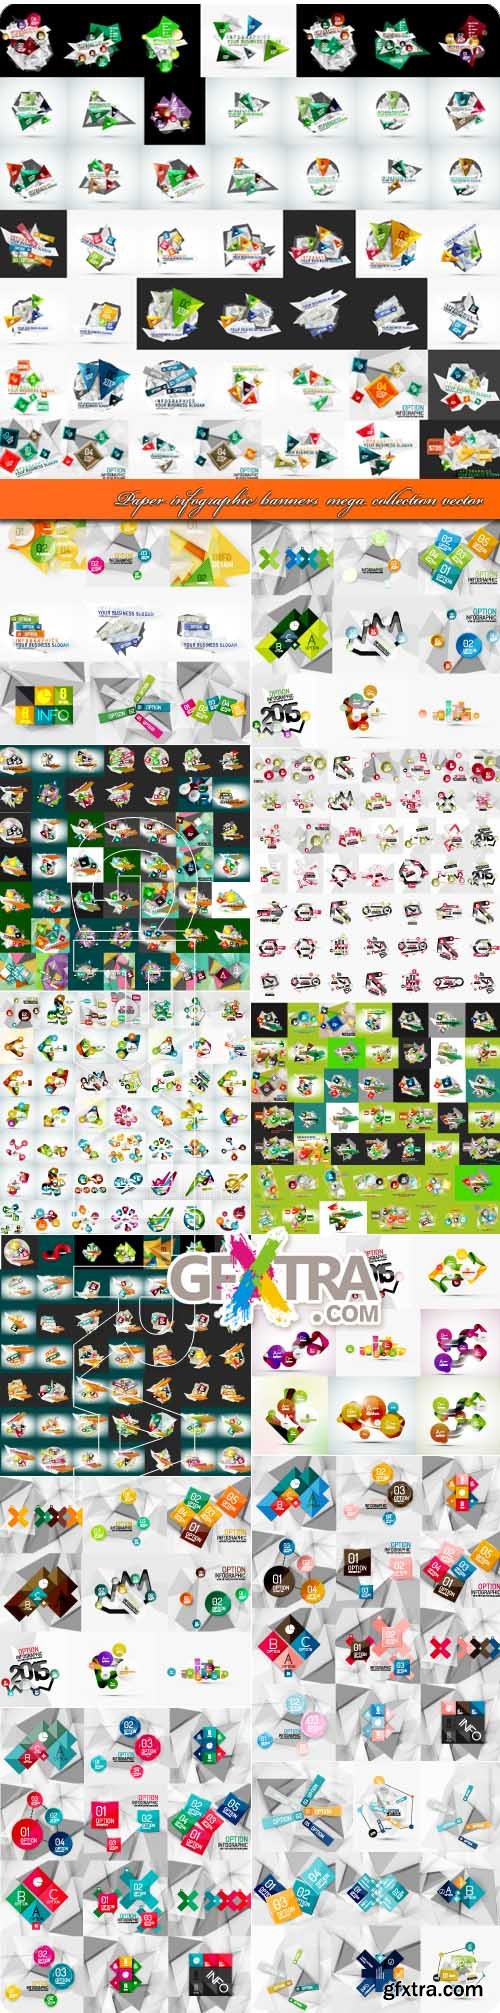 Paper infographic banners mega collection vector